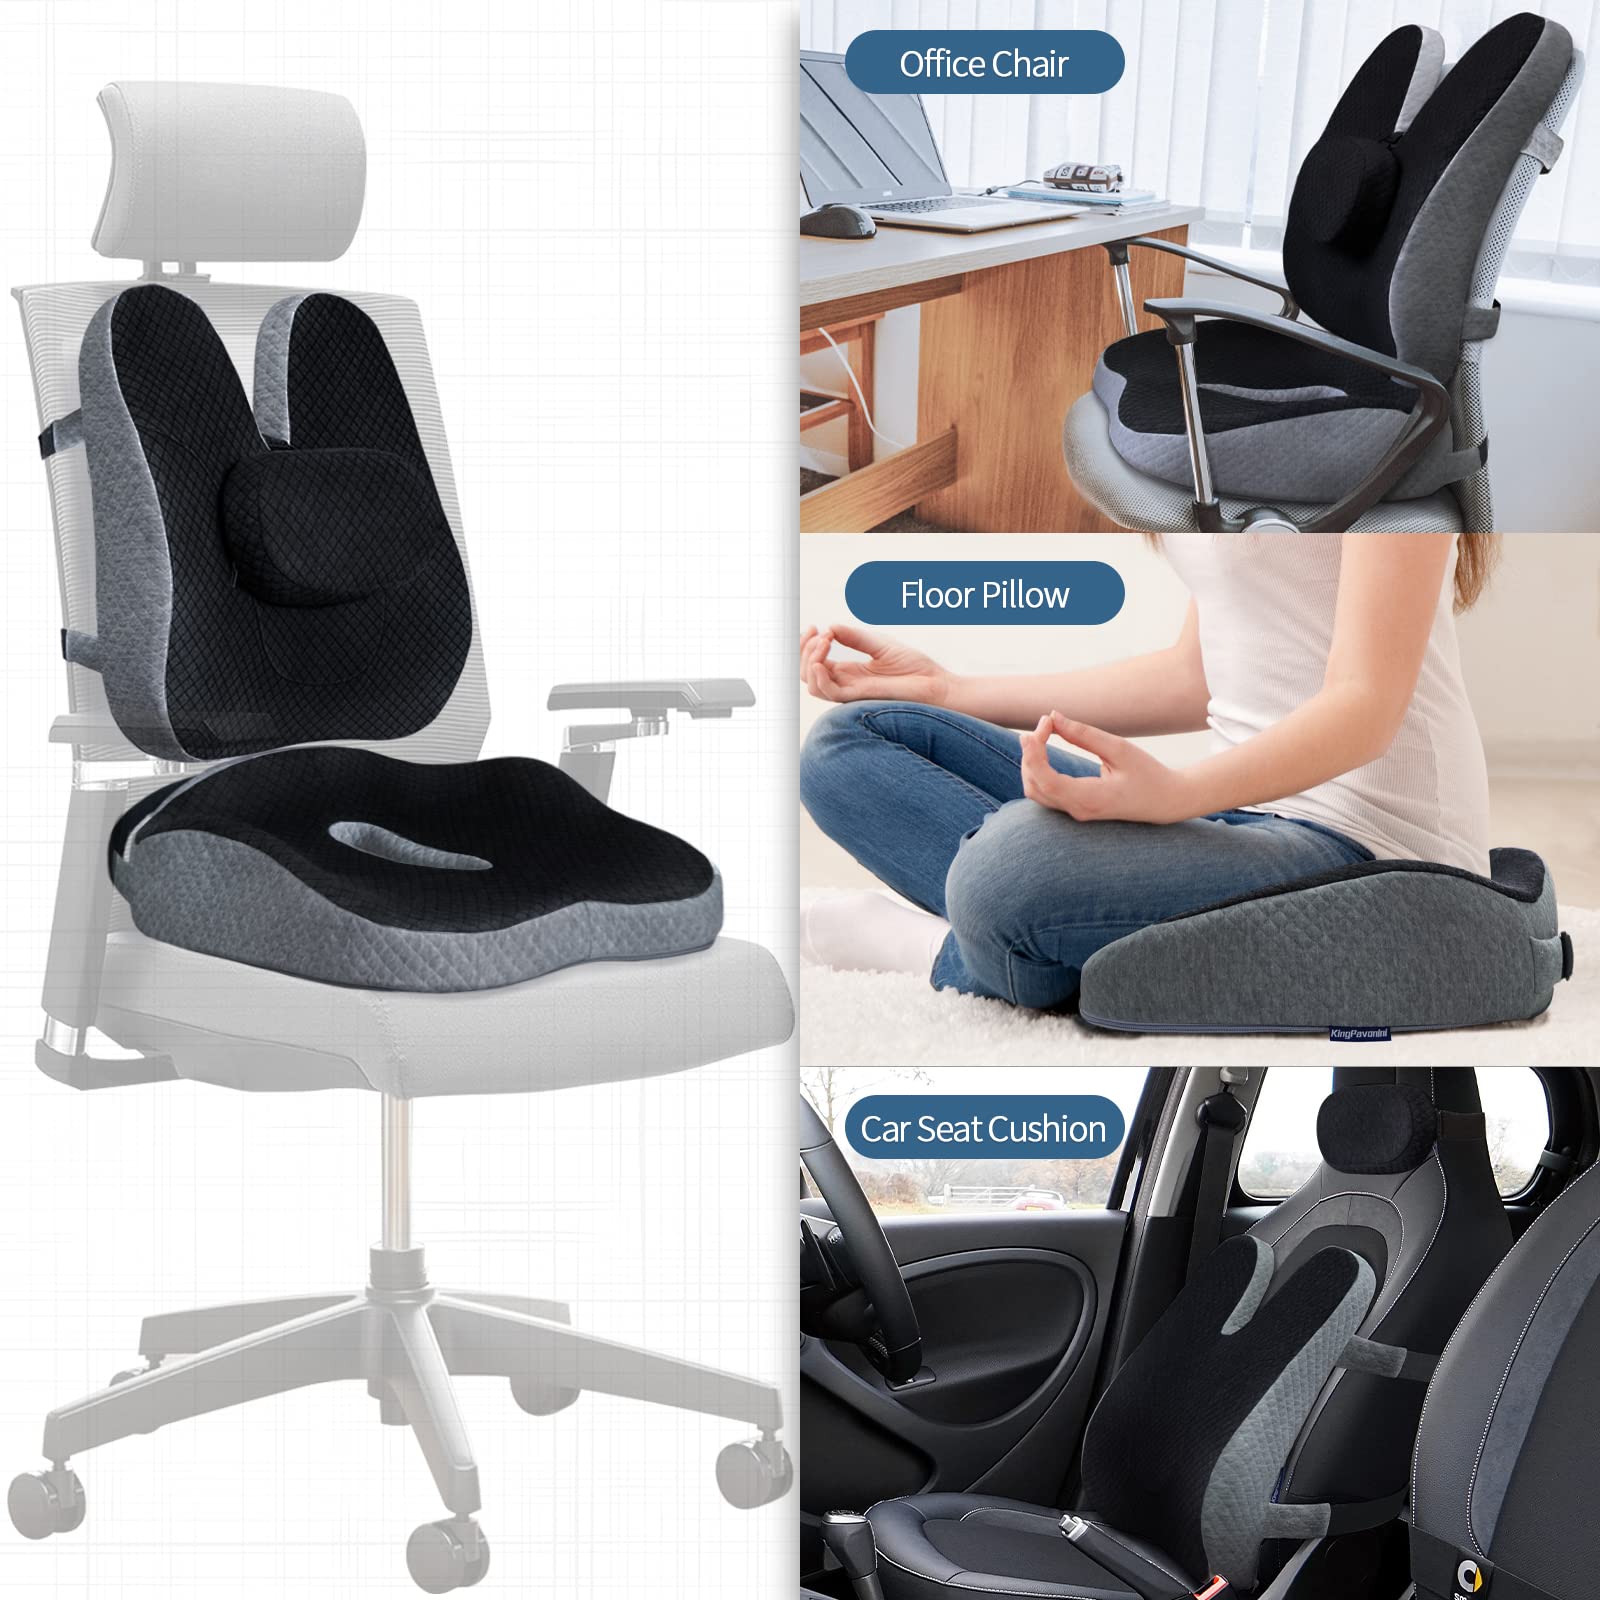 Memory Foam Seat Cushion & Lumbar Support Pillow for Office Chair Car Wheelchair, 3 Piece Chair Cushion Set with Adjustable Straps for Lower Back, Tailbone, Sciatica, Hip Pain Relief, CertiPUR-US